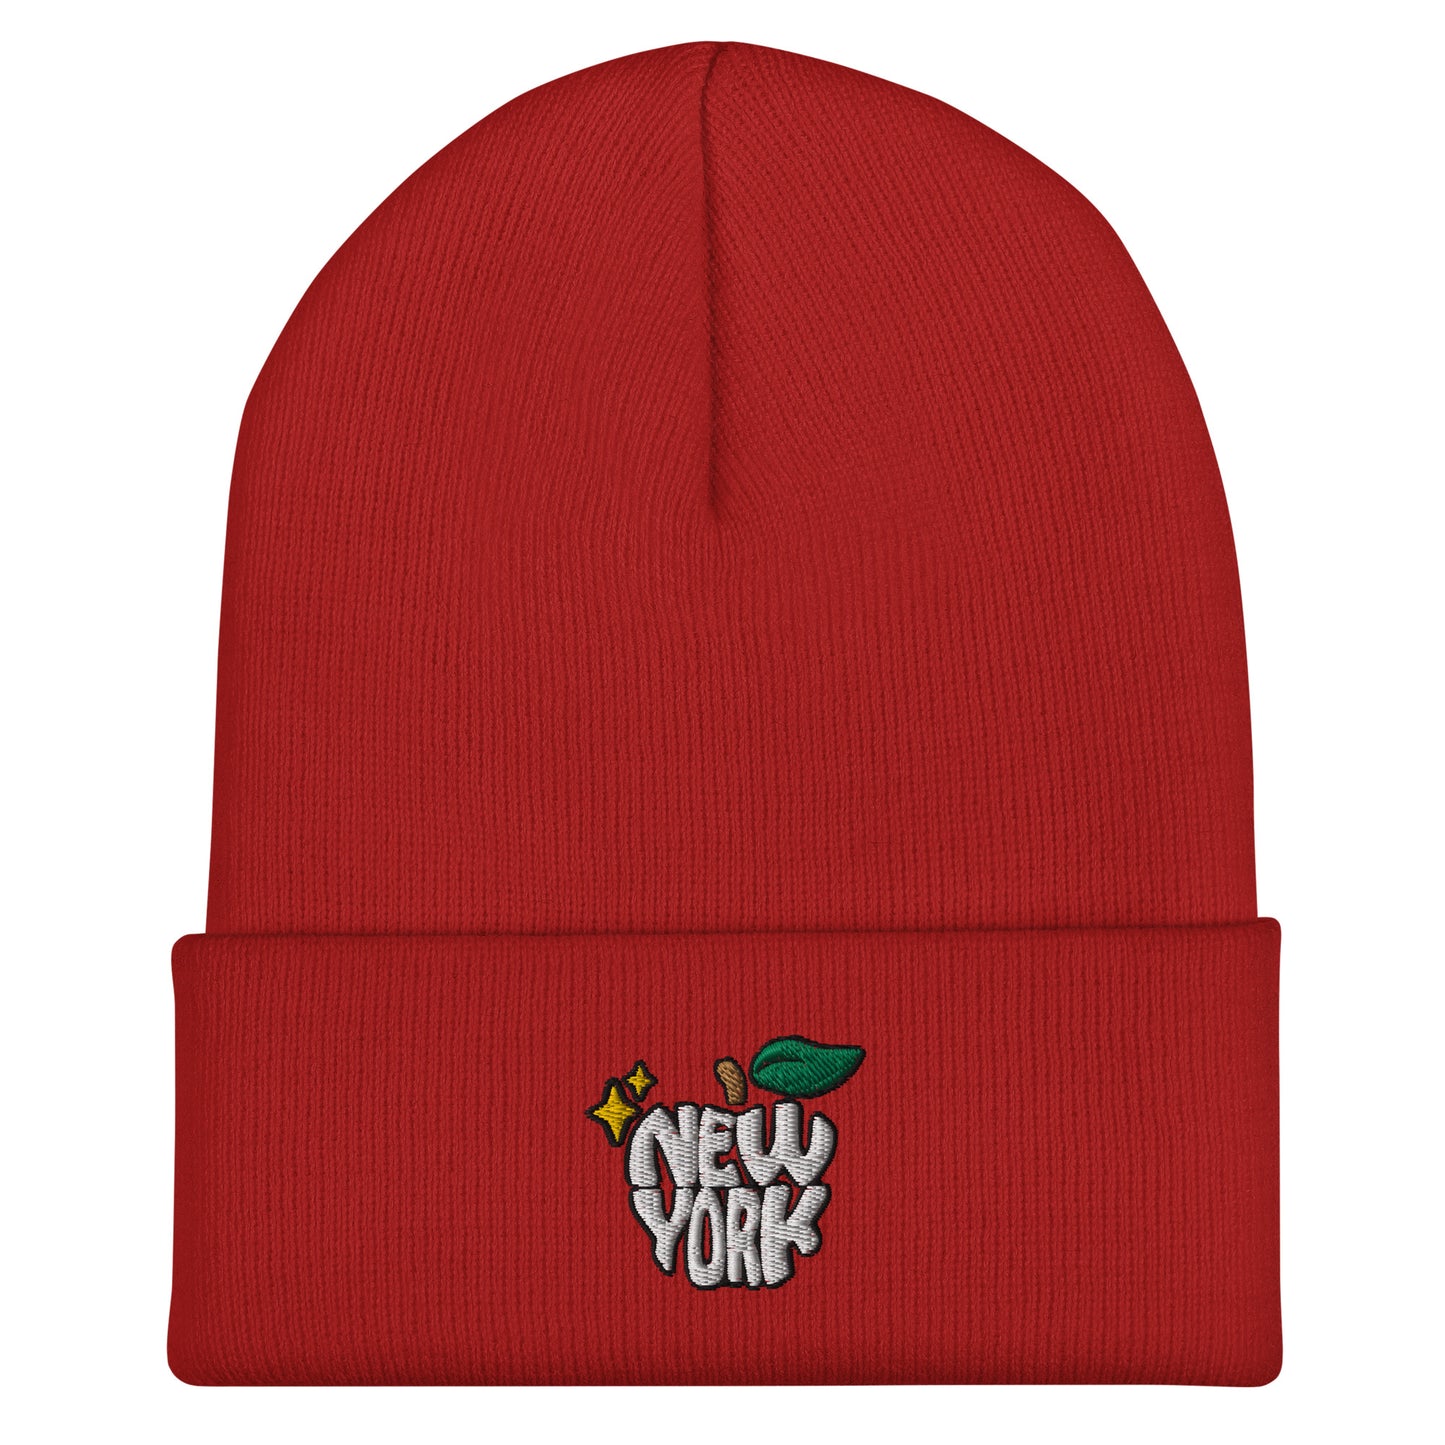 New York Apple Logo Embroidered Red Cuffed Beanie Hat Scattered Streetwear